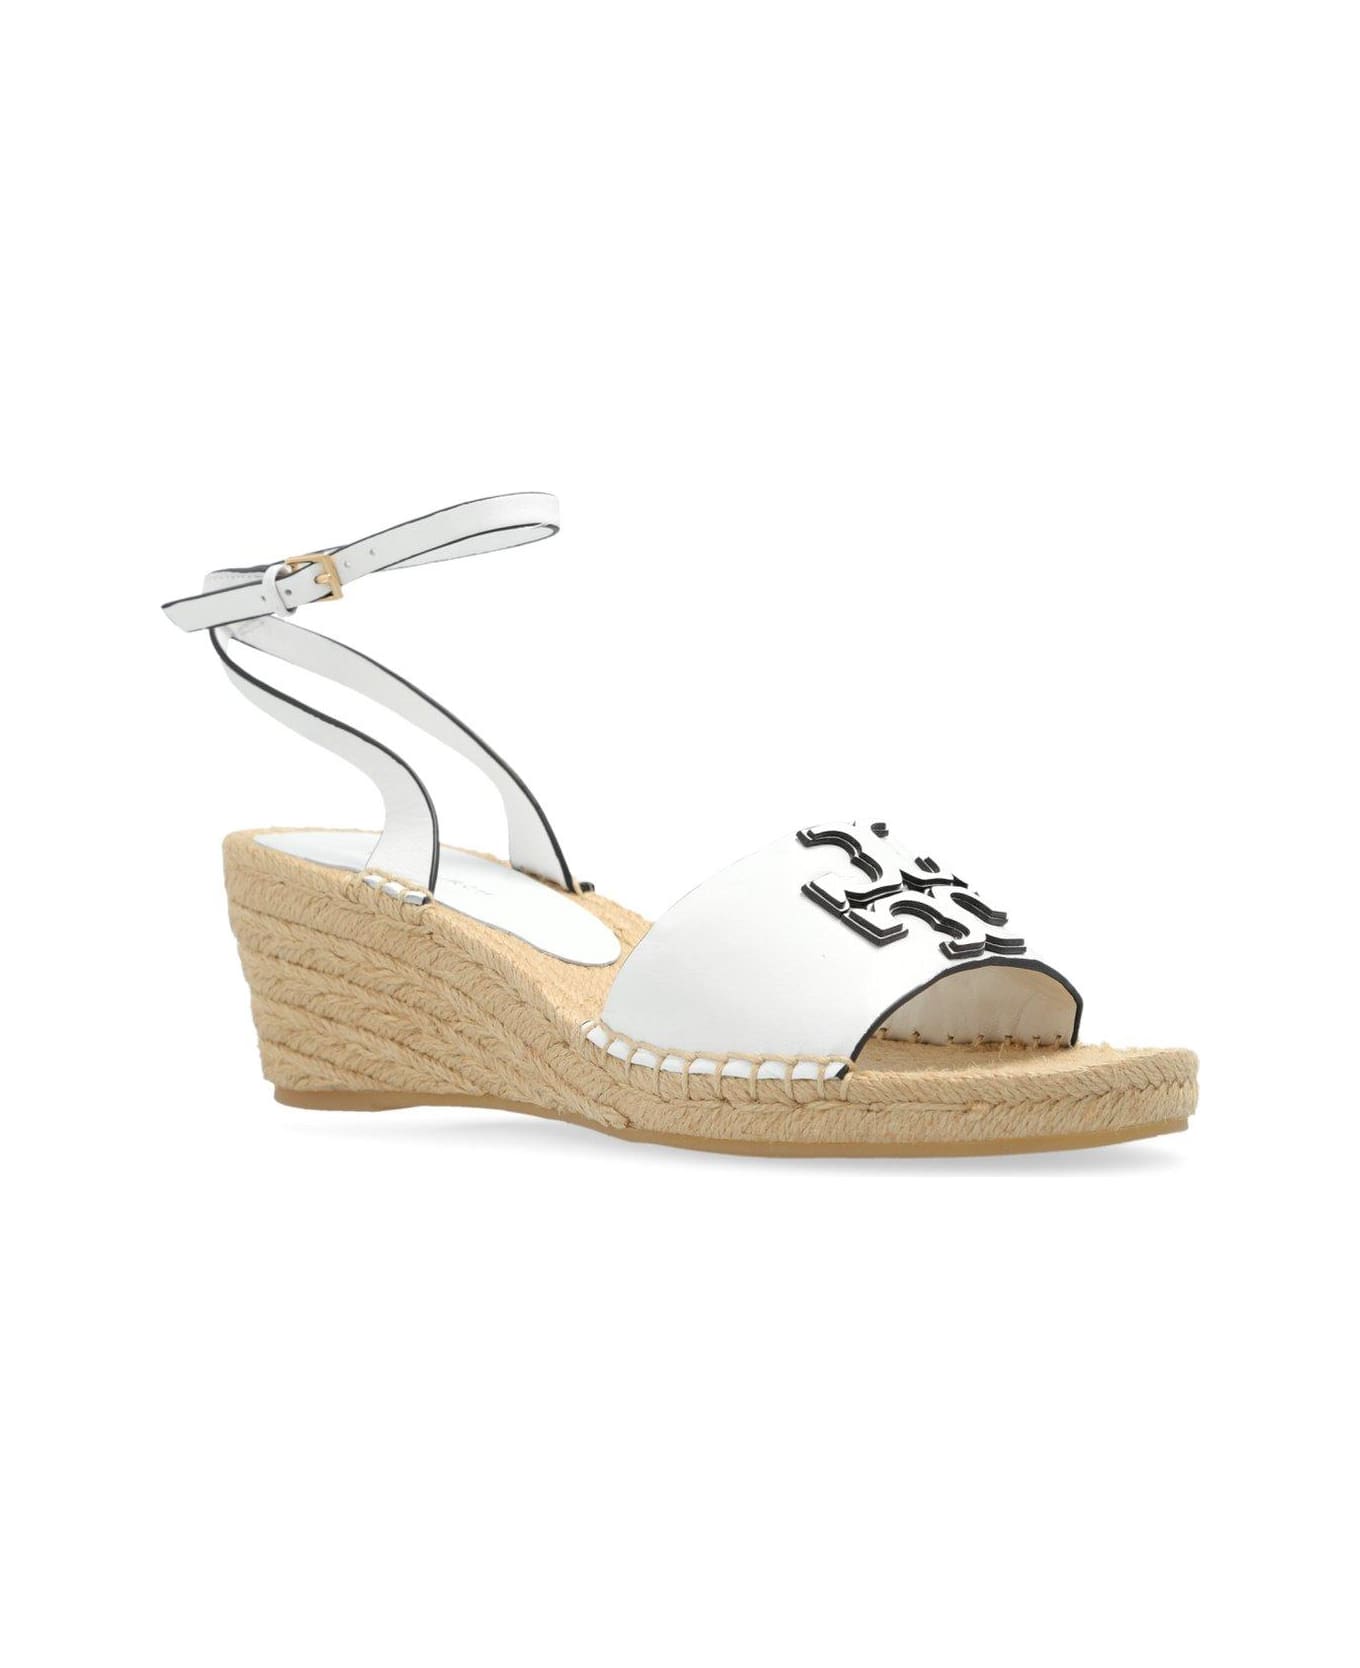 Tory Burch Double-t Wedge Espadrilles - White